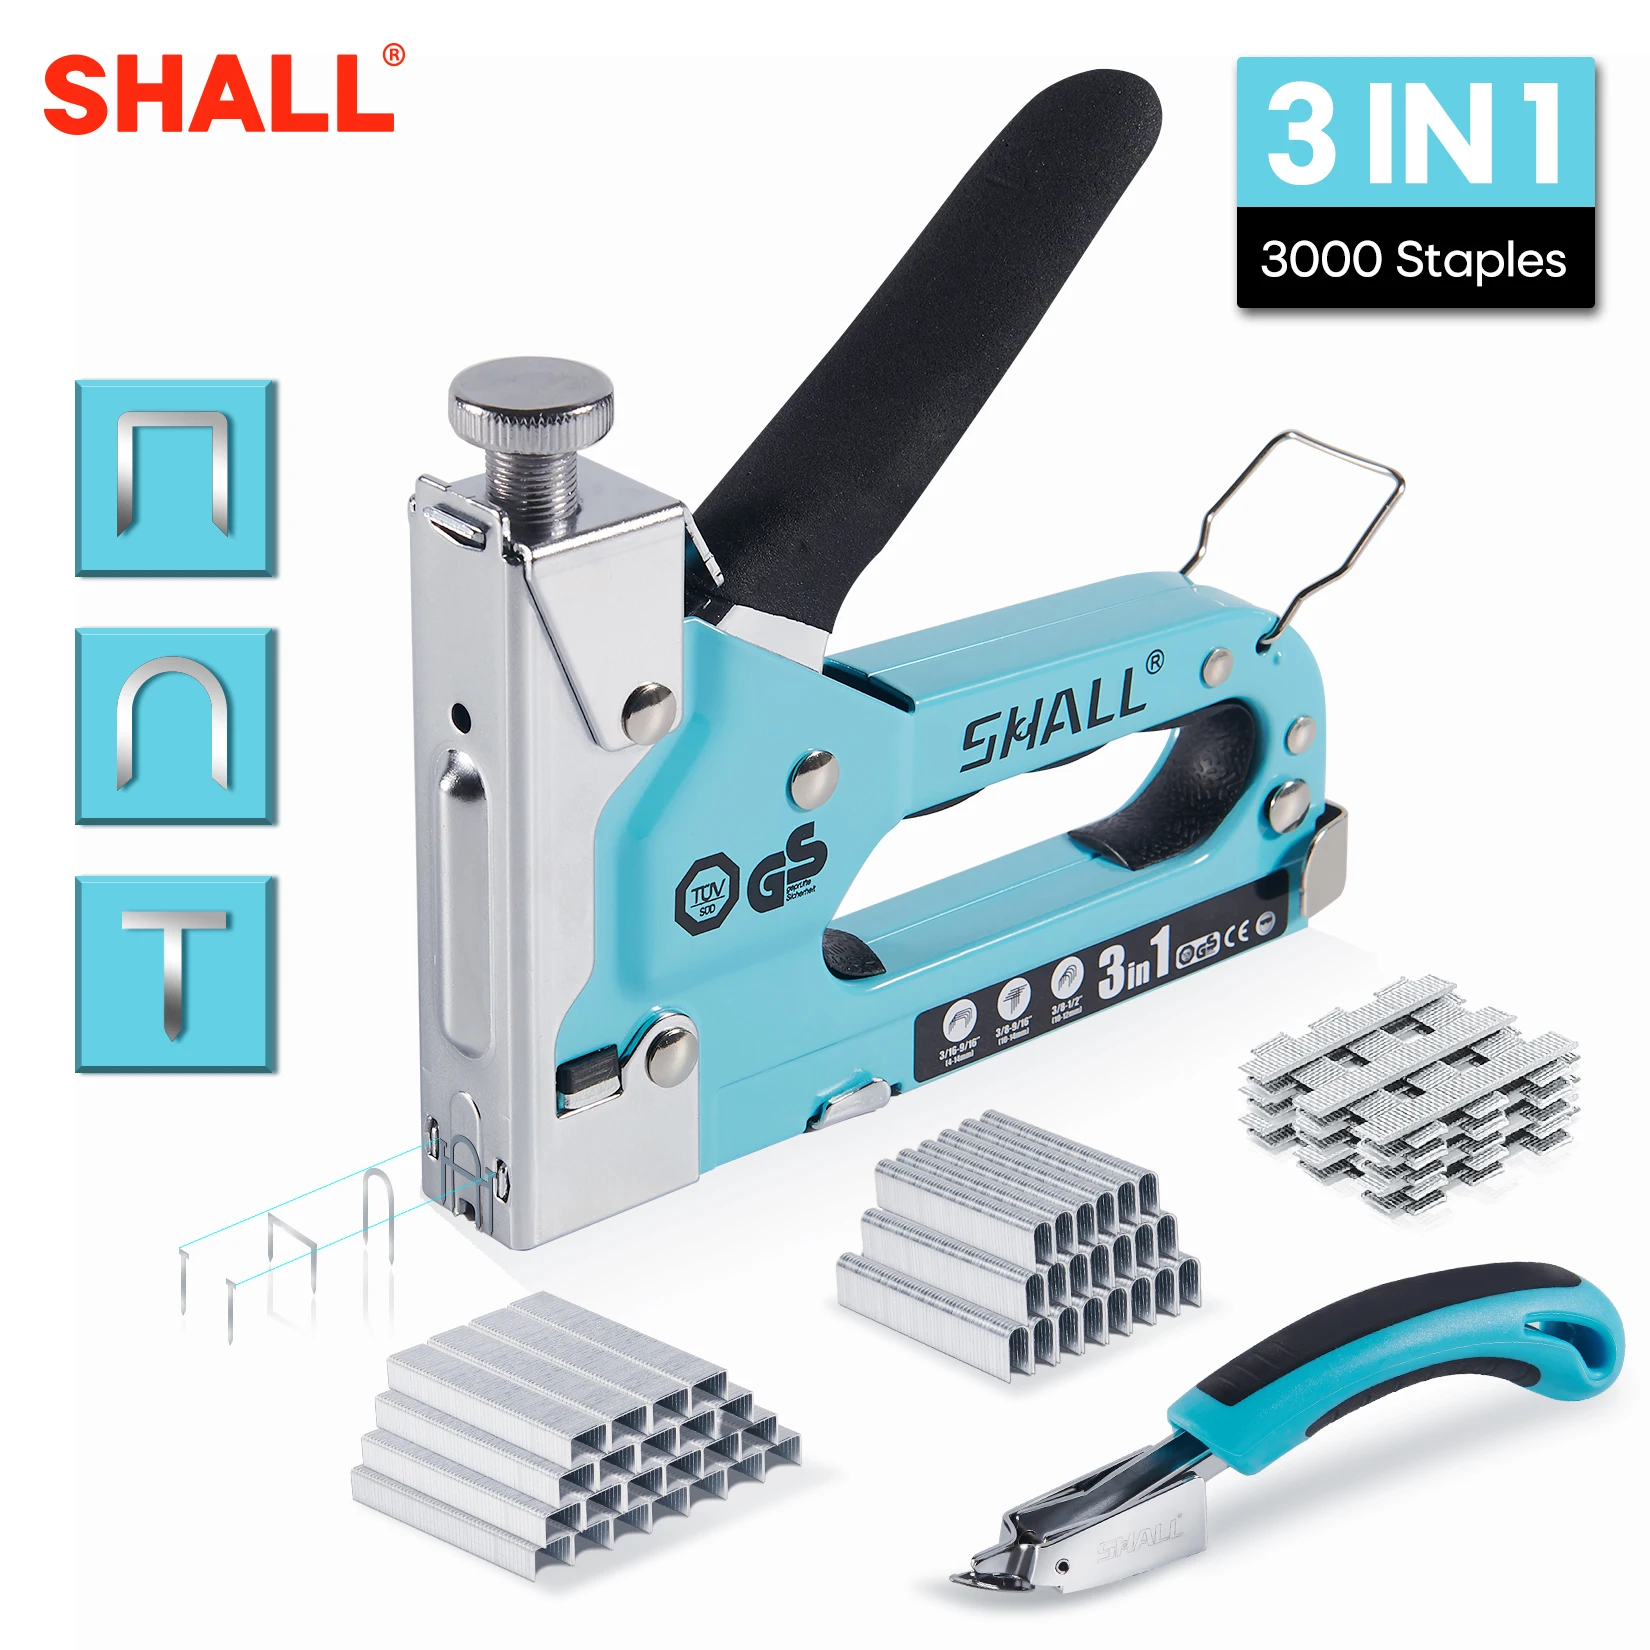 SHALL Nail Gun for Woodworking Light Duty Upholstery Stapler with 1600pcs  JT21 Staples for home DIY Decoration free shipping